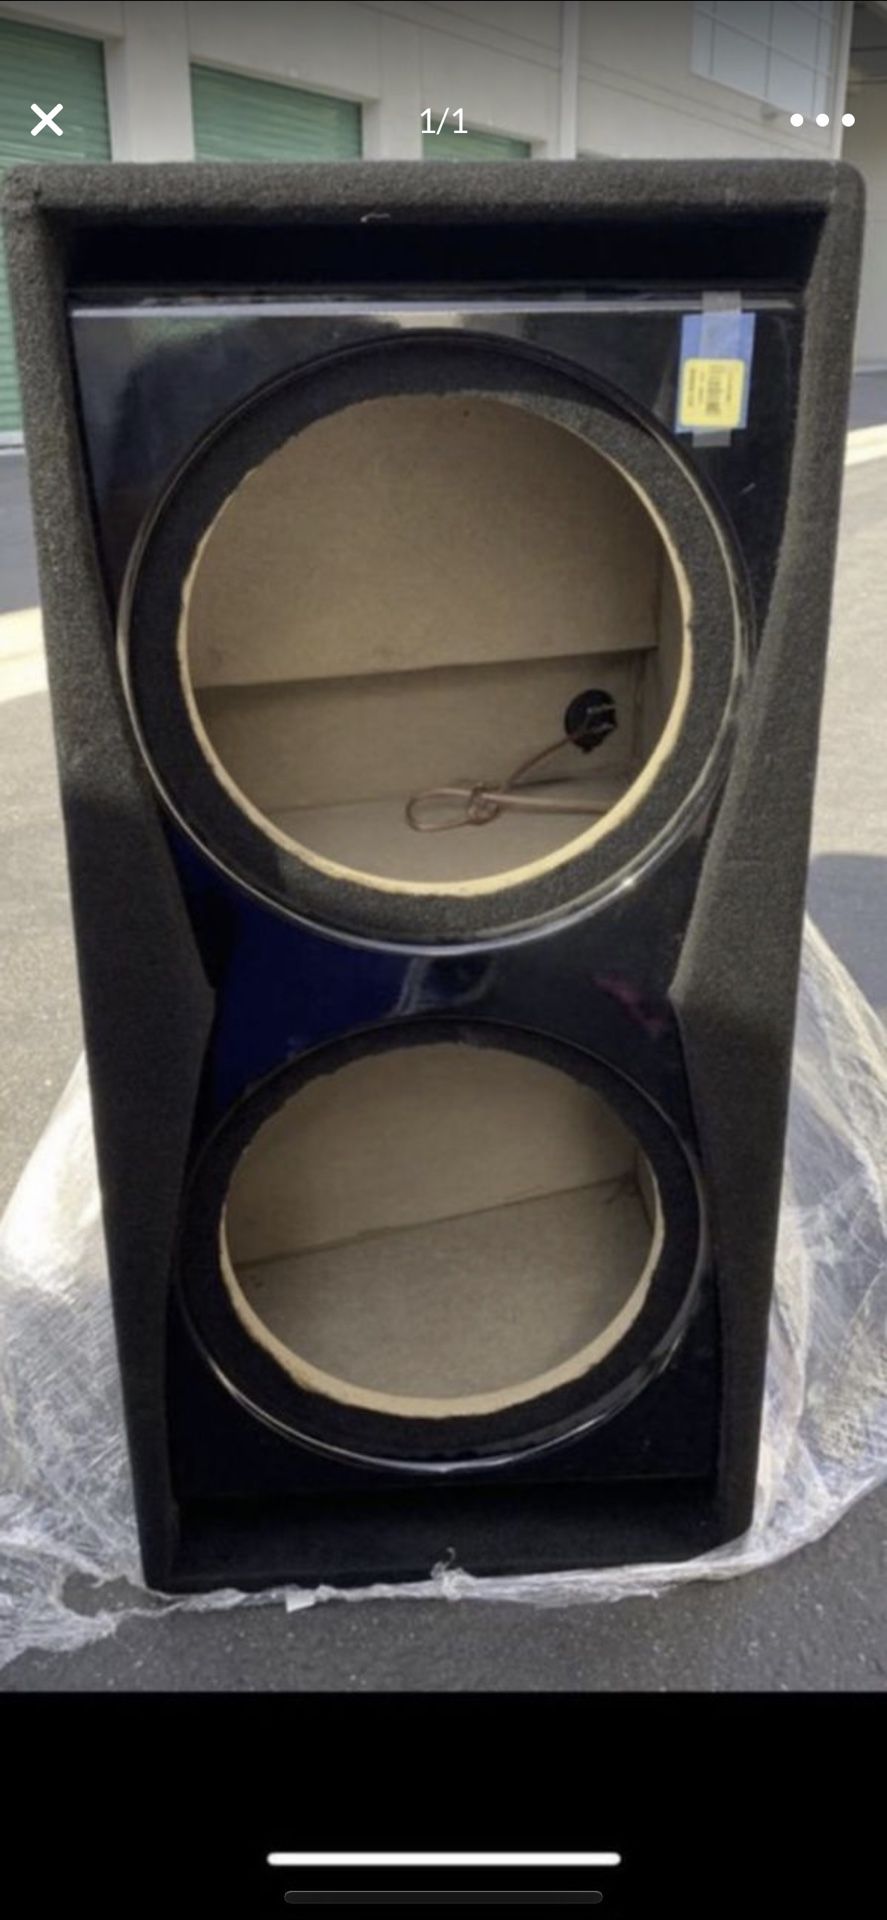 New Metra 12” Dual Subwoofer ported TCPSP-212